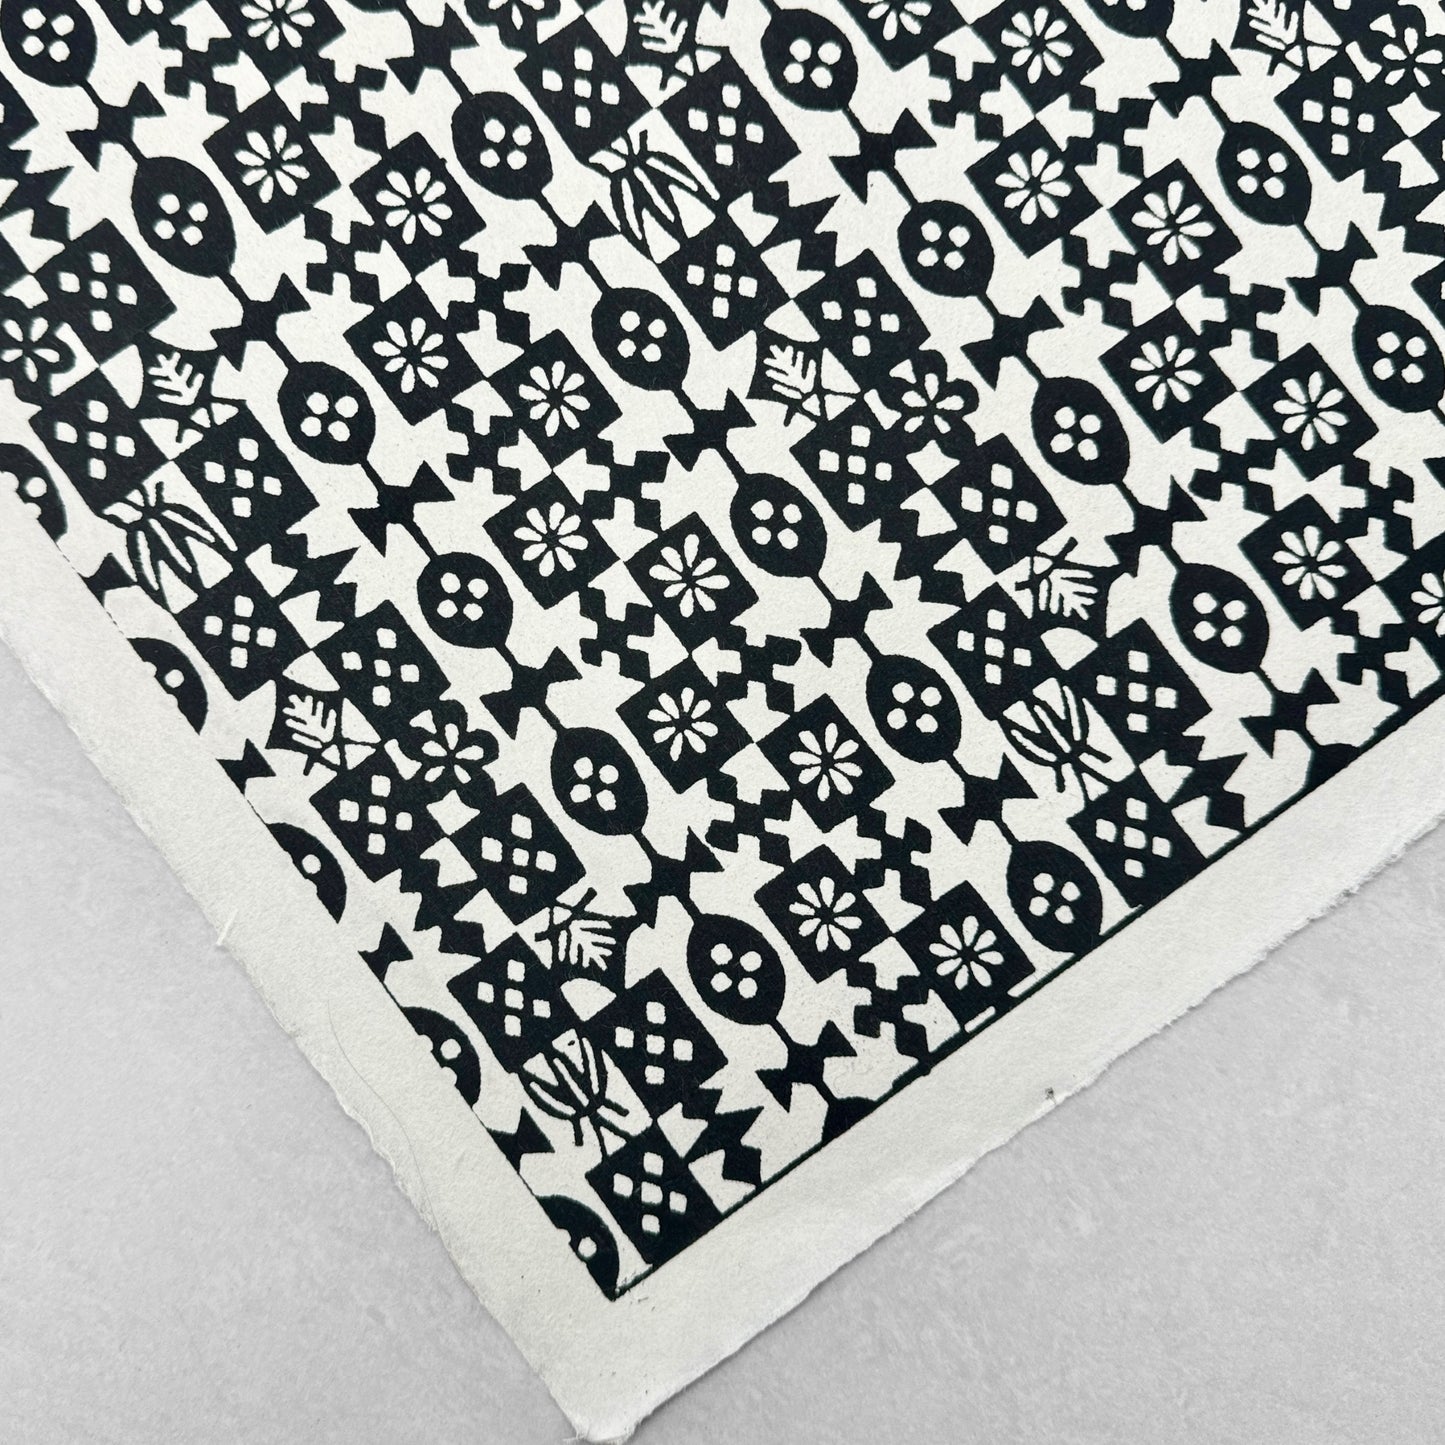 Japanese stencil-dyed, katazome-shi patterned paper. Black and white geometric design. Flat view